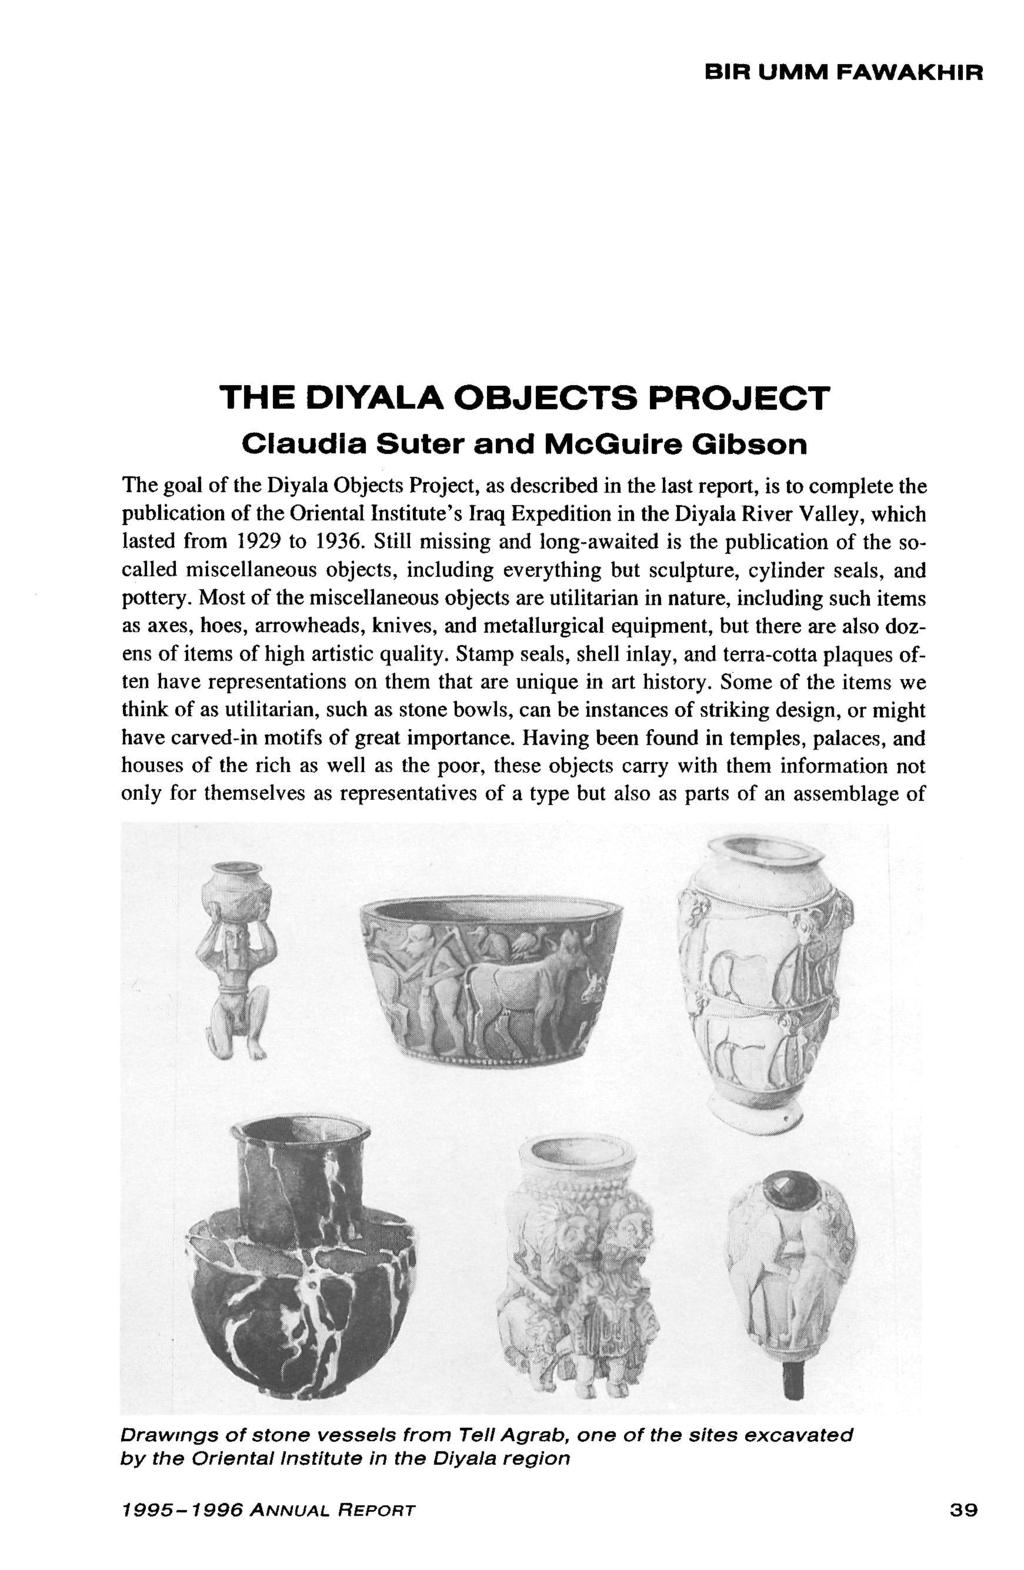 BIR U M M FAWAKHIR THE DIYALA OBJECTS PROJECT Claudia Suter a n d McGuire Gibson The goal of the Diyala Objects Project, as described in the last report, is to complete the publication of the